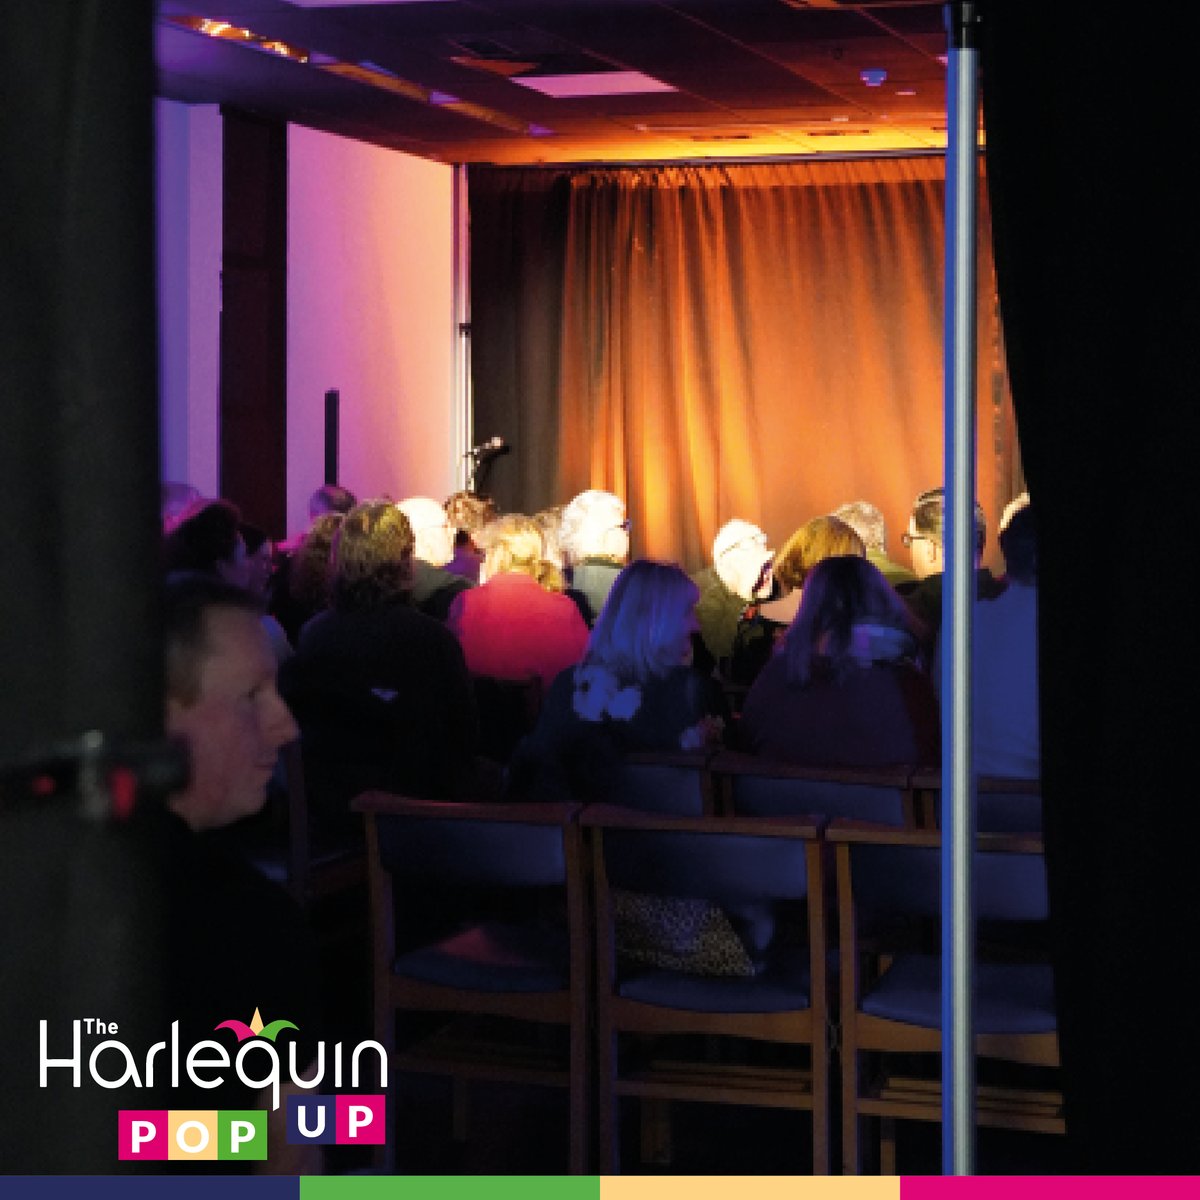 🎭 Do you need space for an upcoming event or performance? The Harlequin Pop Up in the Belfry is right in the centre of town & offers great accessibility.
Email harlequin@reigate-banstead.gov.uk or call 01737 276 500.
#HarlequinPopUp #Redhill #EventSpace #EventHire #RH1